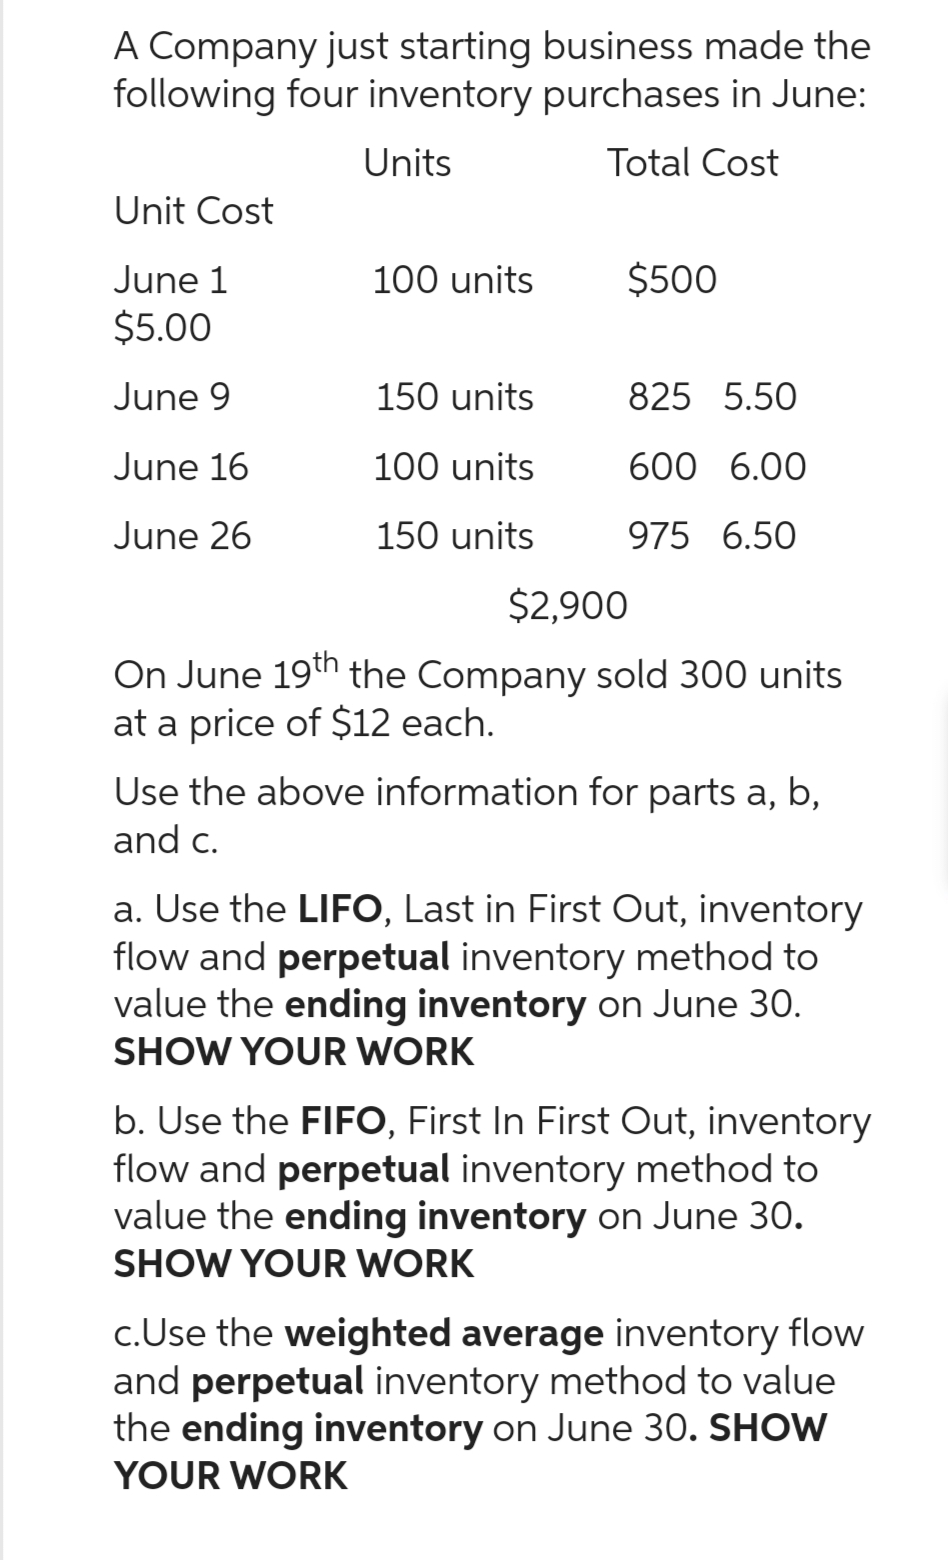 A Company just starting business made the
following four inventory purchases in June:
Units
Total Cost
Unit Cost
June 1
$5.00
June 9
June 16
June 26
100 units
150 units
100 units
150 units
$500
825 5.50
600 6.00
975 6.50
$2,900
On June 19th the Company sold 300 units
at a price of $12 each.
Use the above information for parts a, b,
and c.
a. Use the LIFO, Last in First Out, inventory
flow and perpetual inventory method to
value the ending inventory on June 30.
SHOW YOUR WORK
b. Use the FIFO, First In First Out, inventory
flow and perpetual inventory method to
value the ending inventory on June 30.
SHOW YOUR WORK
c.Use the weighted average inventory flow
and perpetual inventory method to value
the ending inventory on June 30. SHOW
YOUR WORK